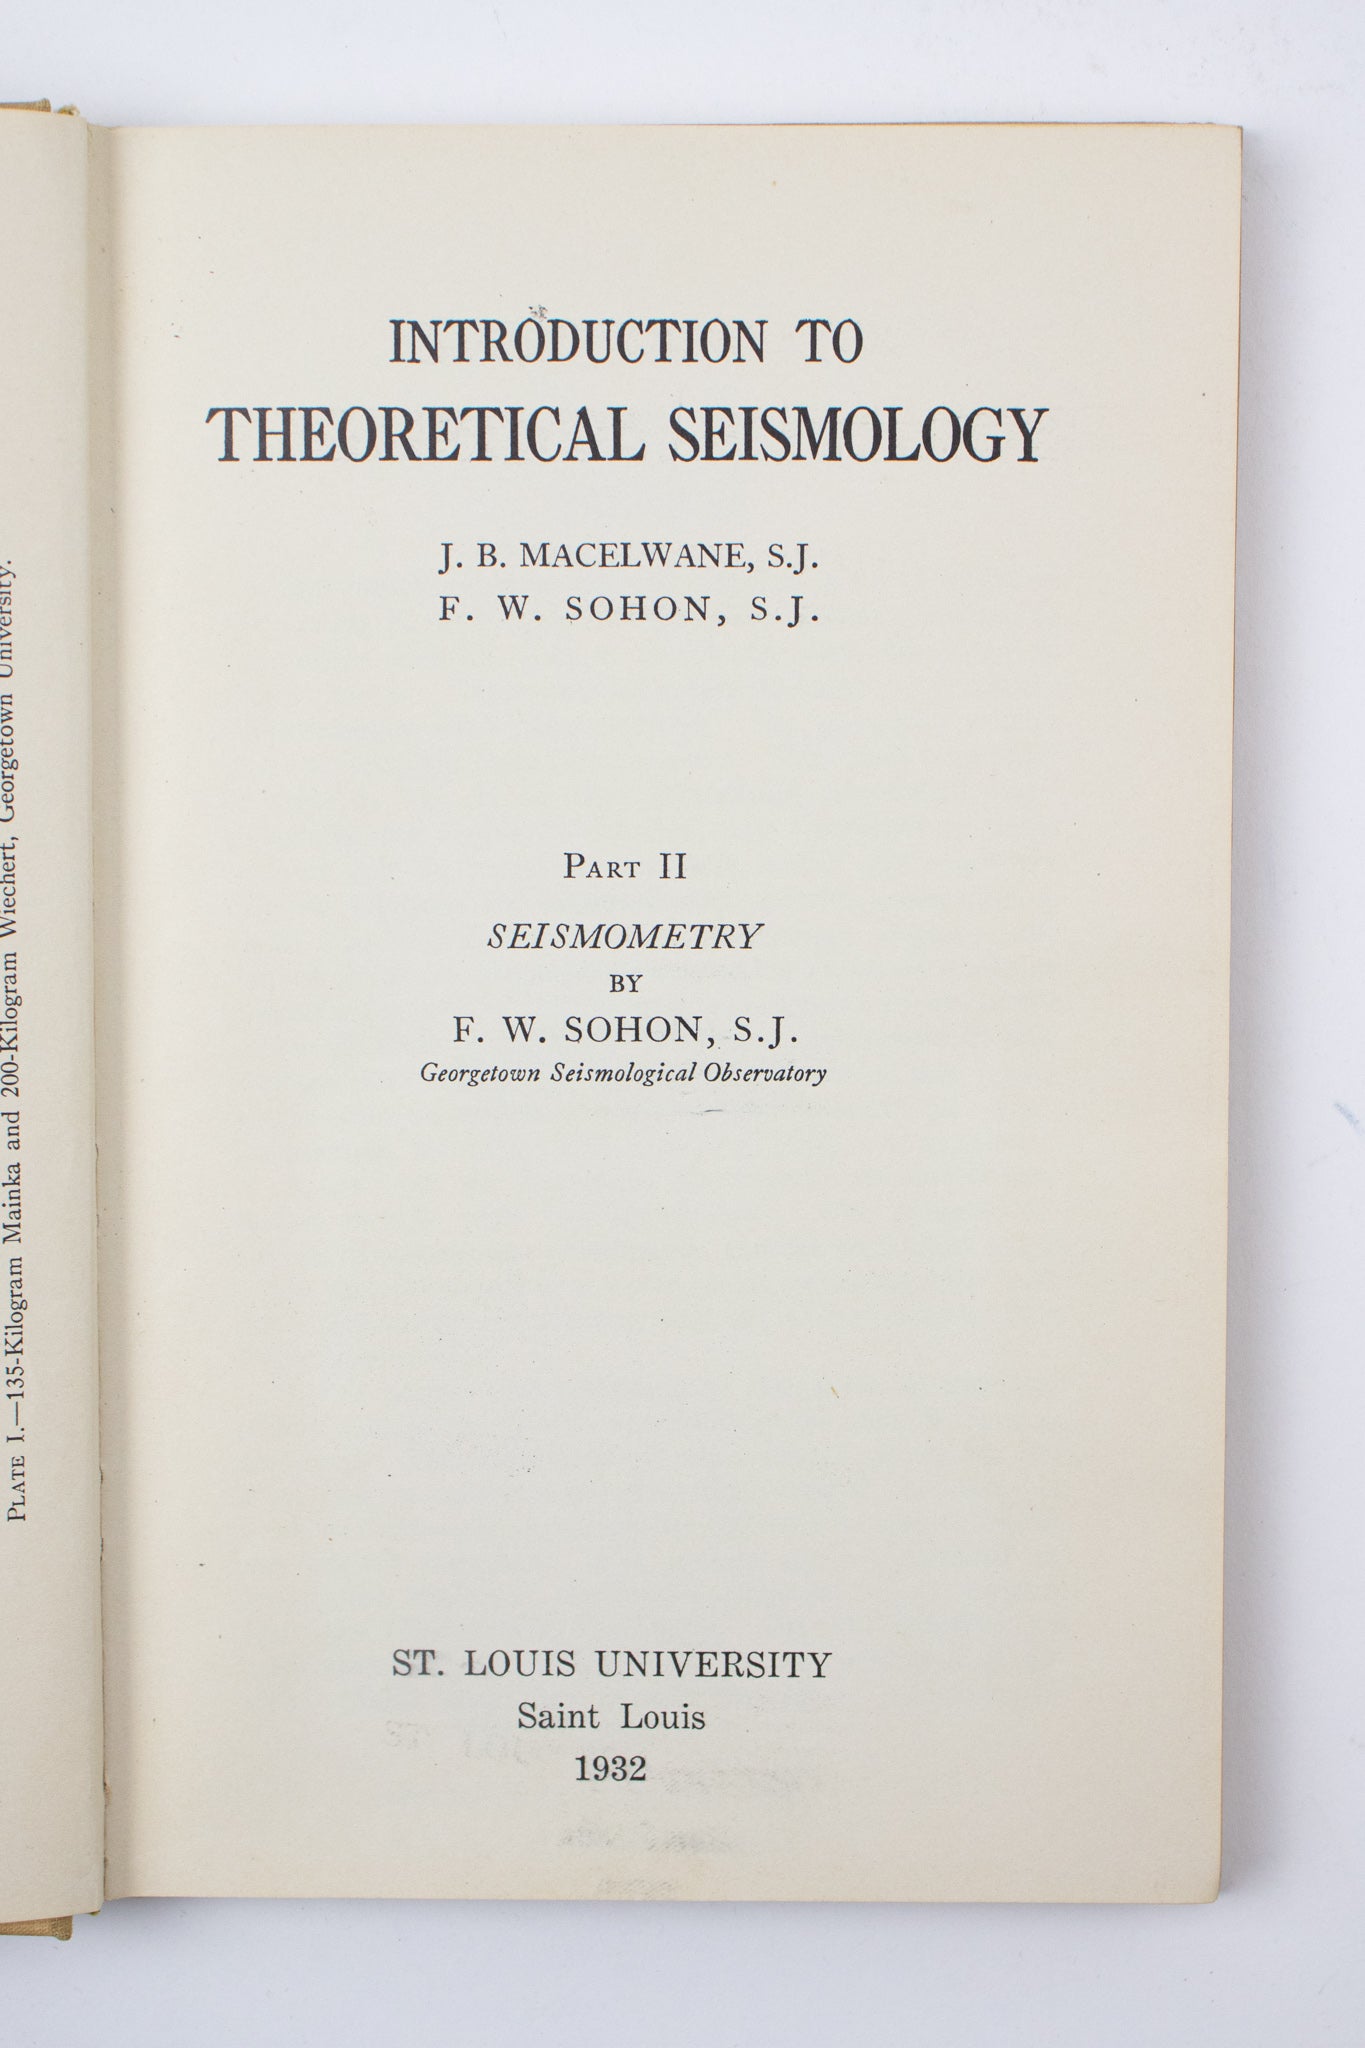 Introduction to Theoretical Seismology: Part ll